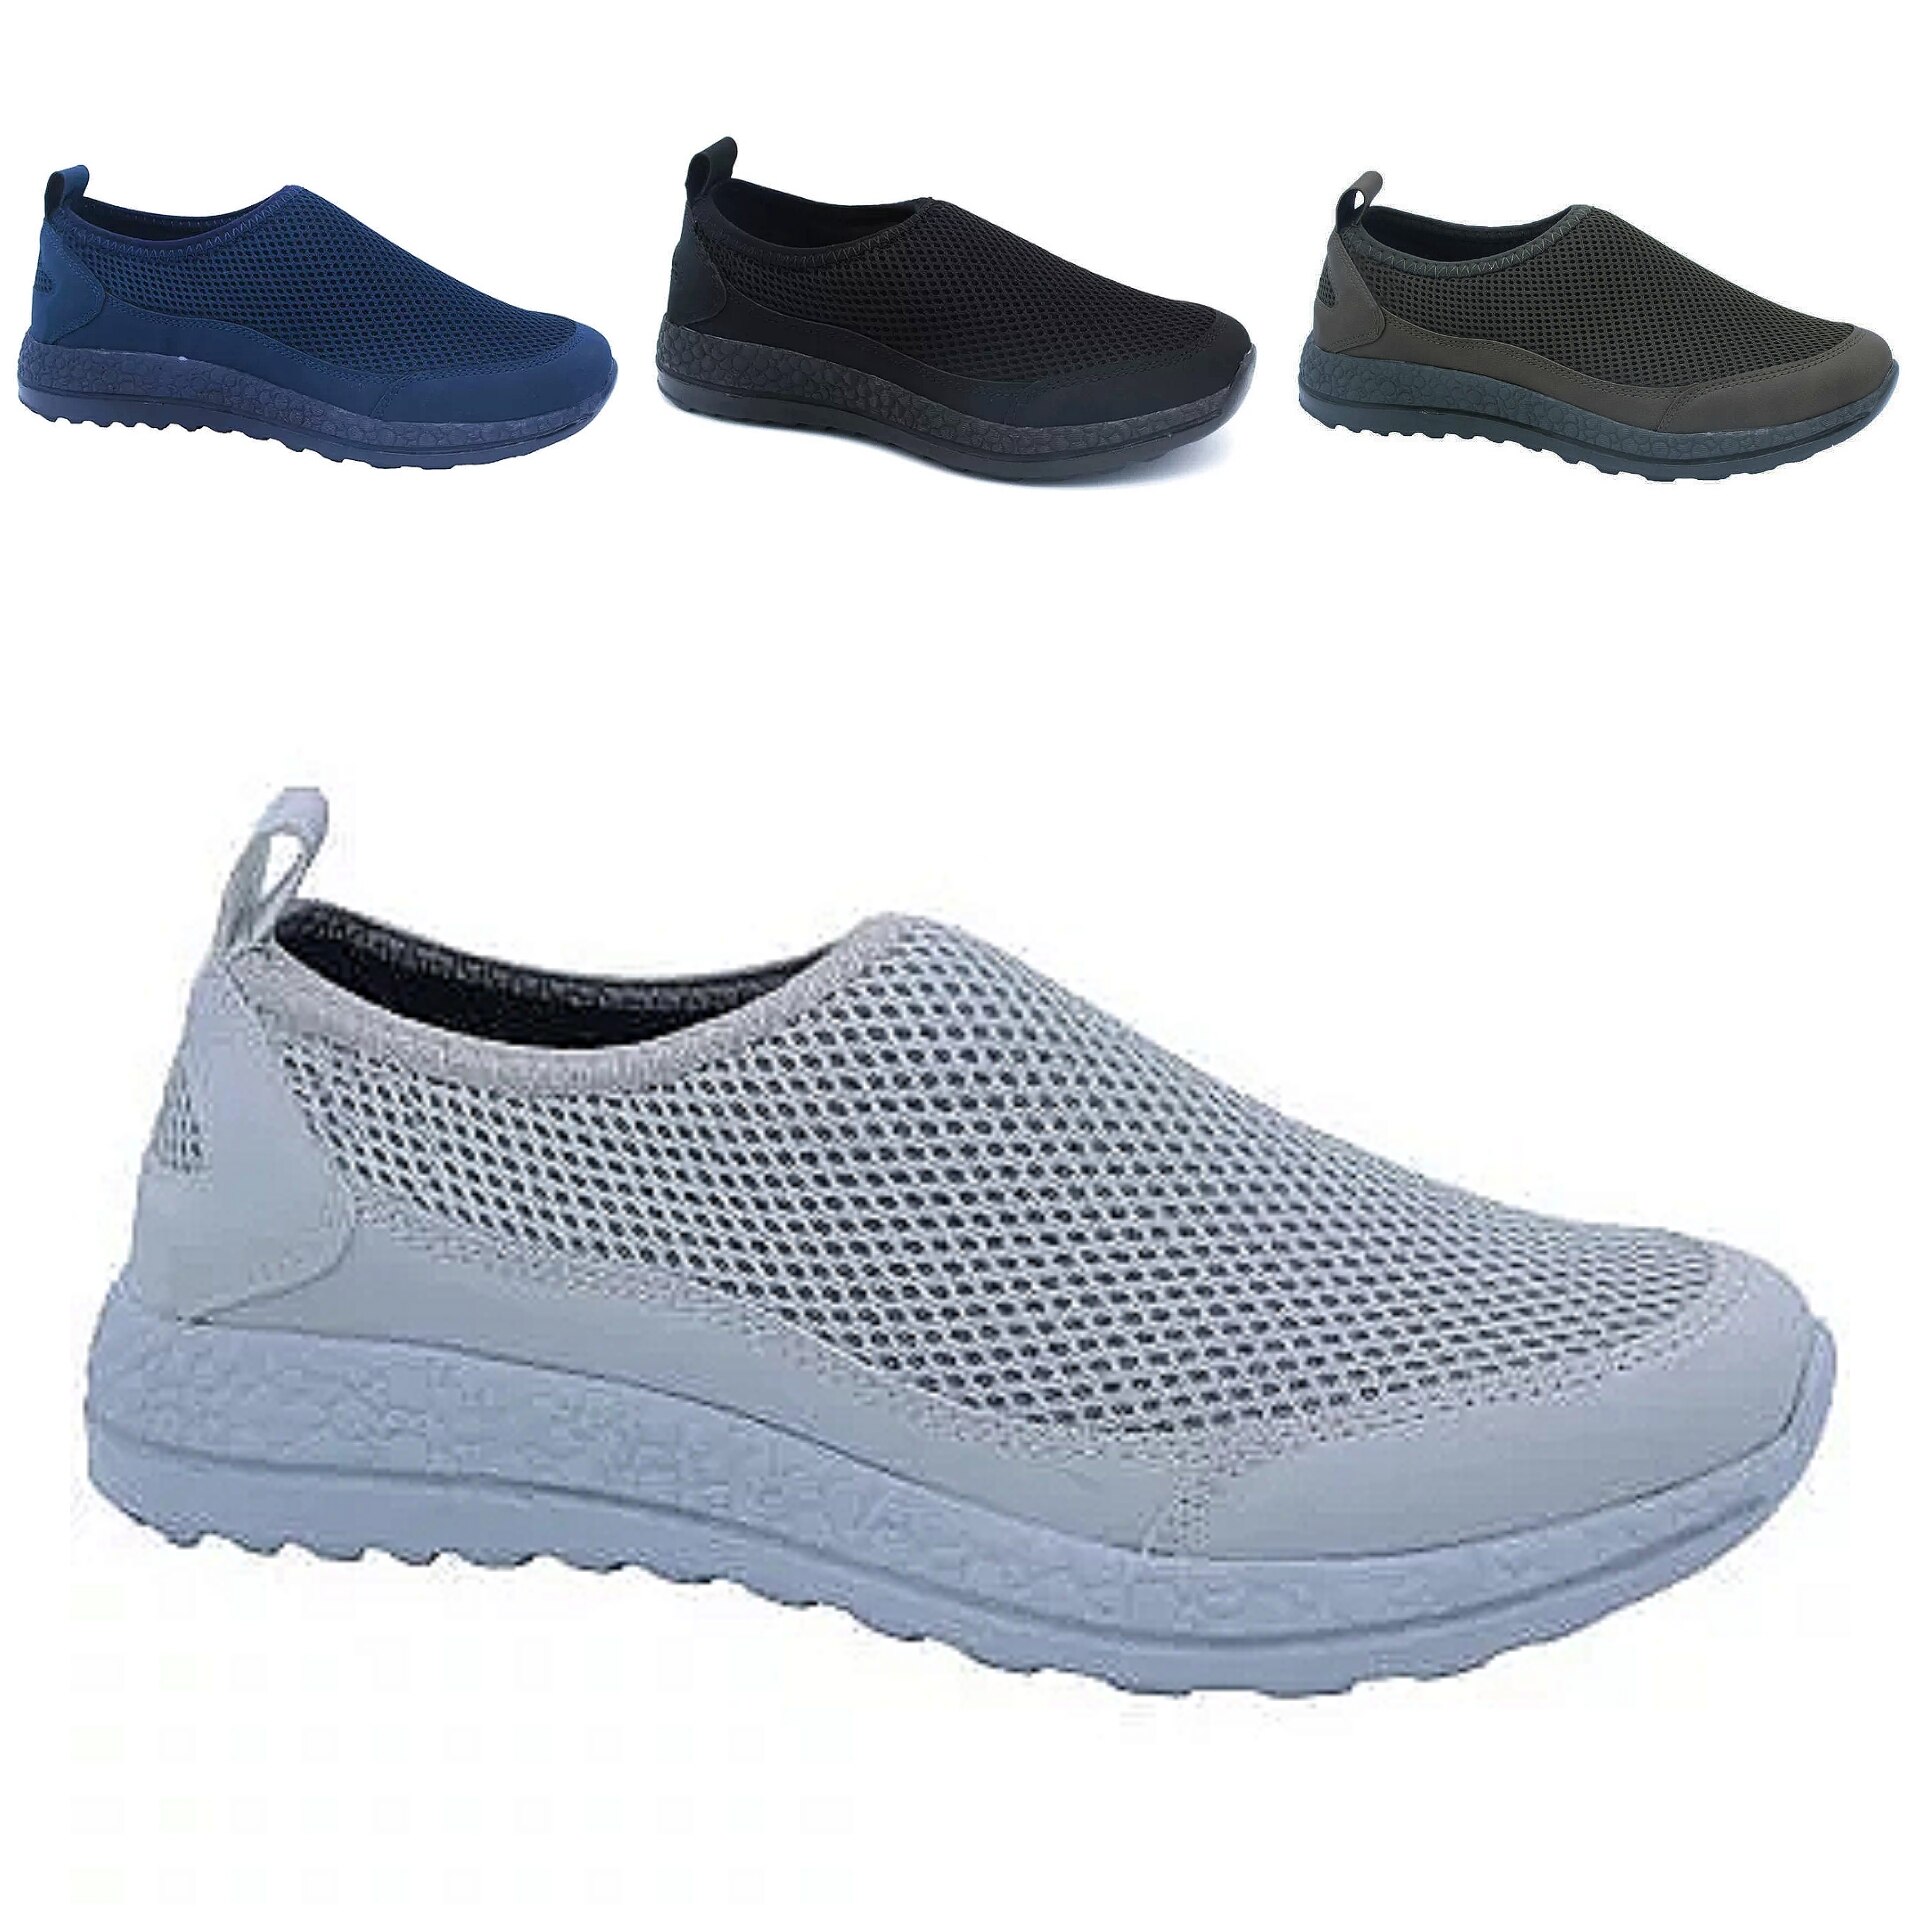 Women Men Vulcanized Outdoor Walking High Quality Shoes Breathable Soft Track and Field Jogging Gym Slip-On Sport